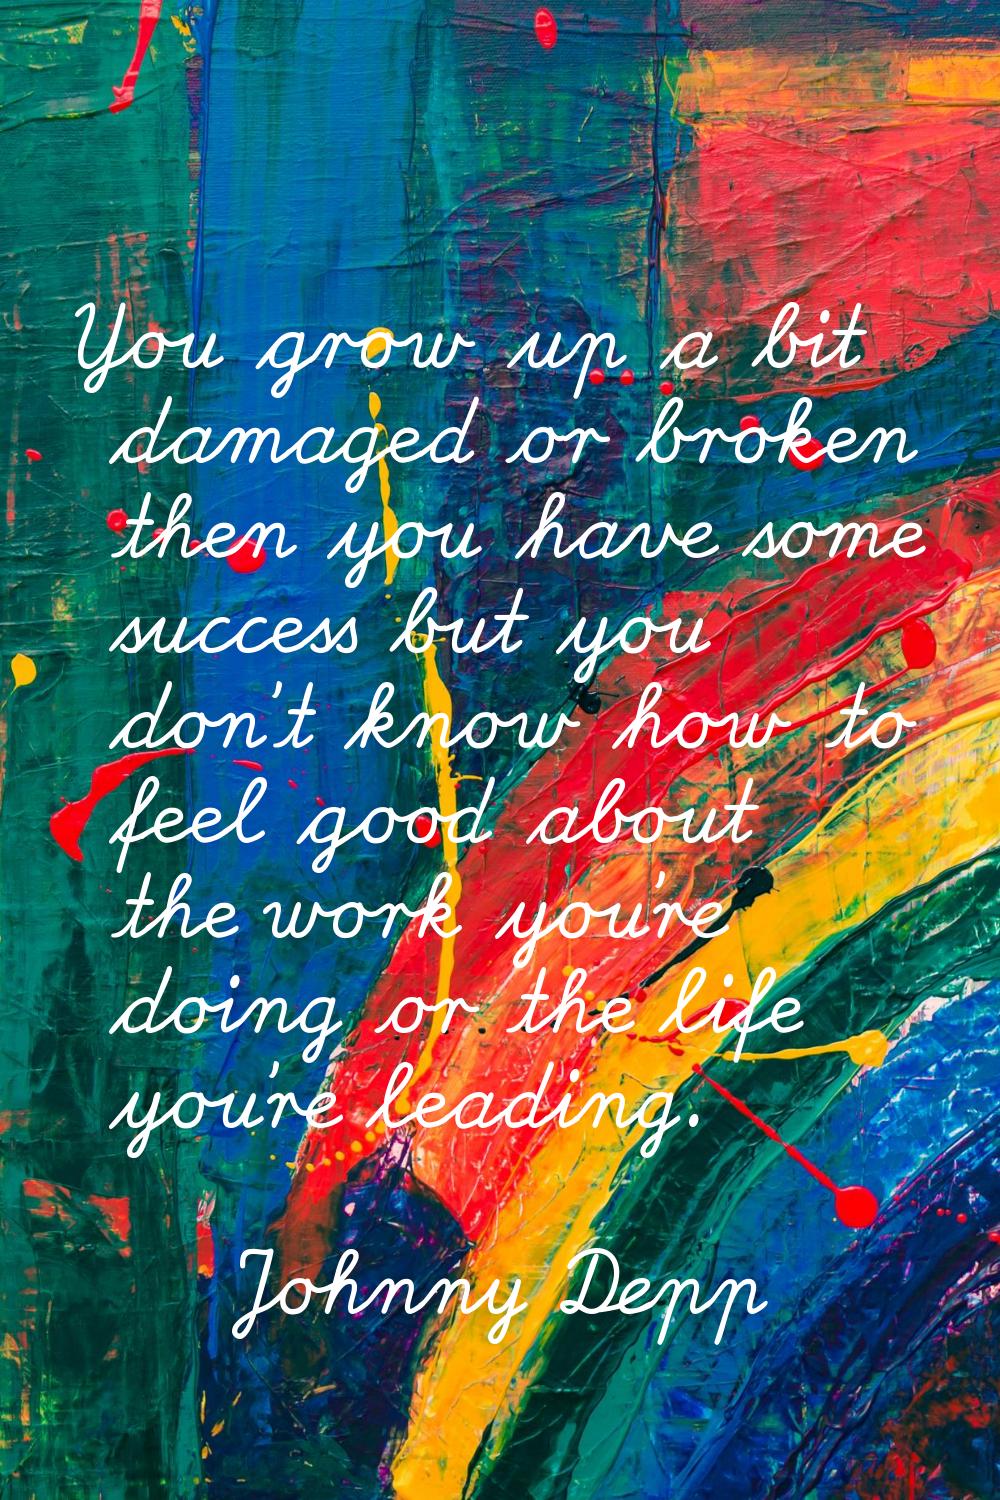 You grow up a bit damaged or broken then you have some success but you don't know how to feel good 